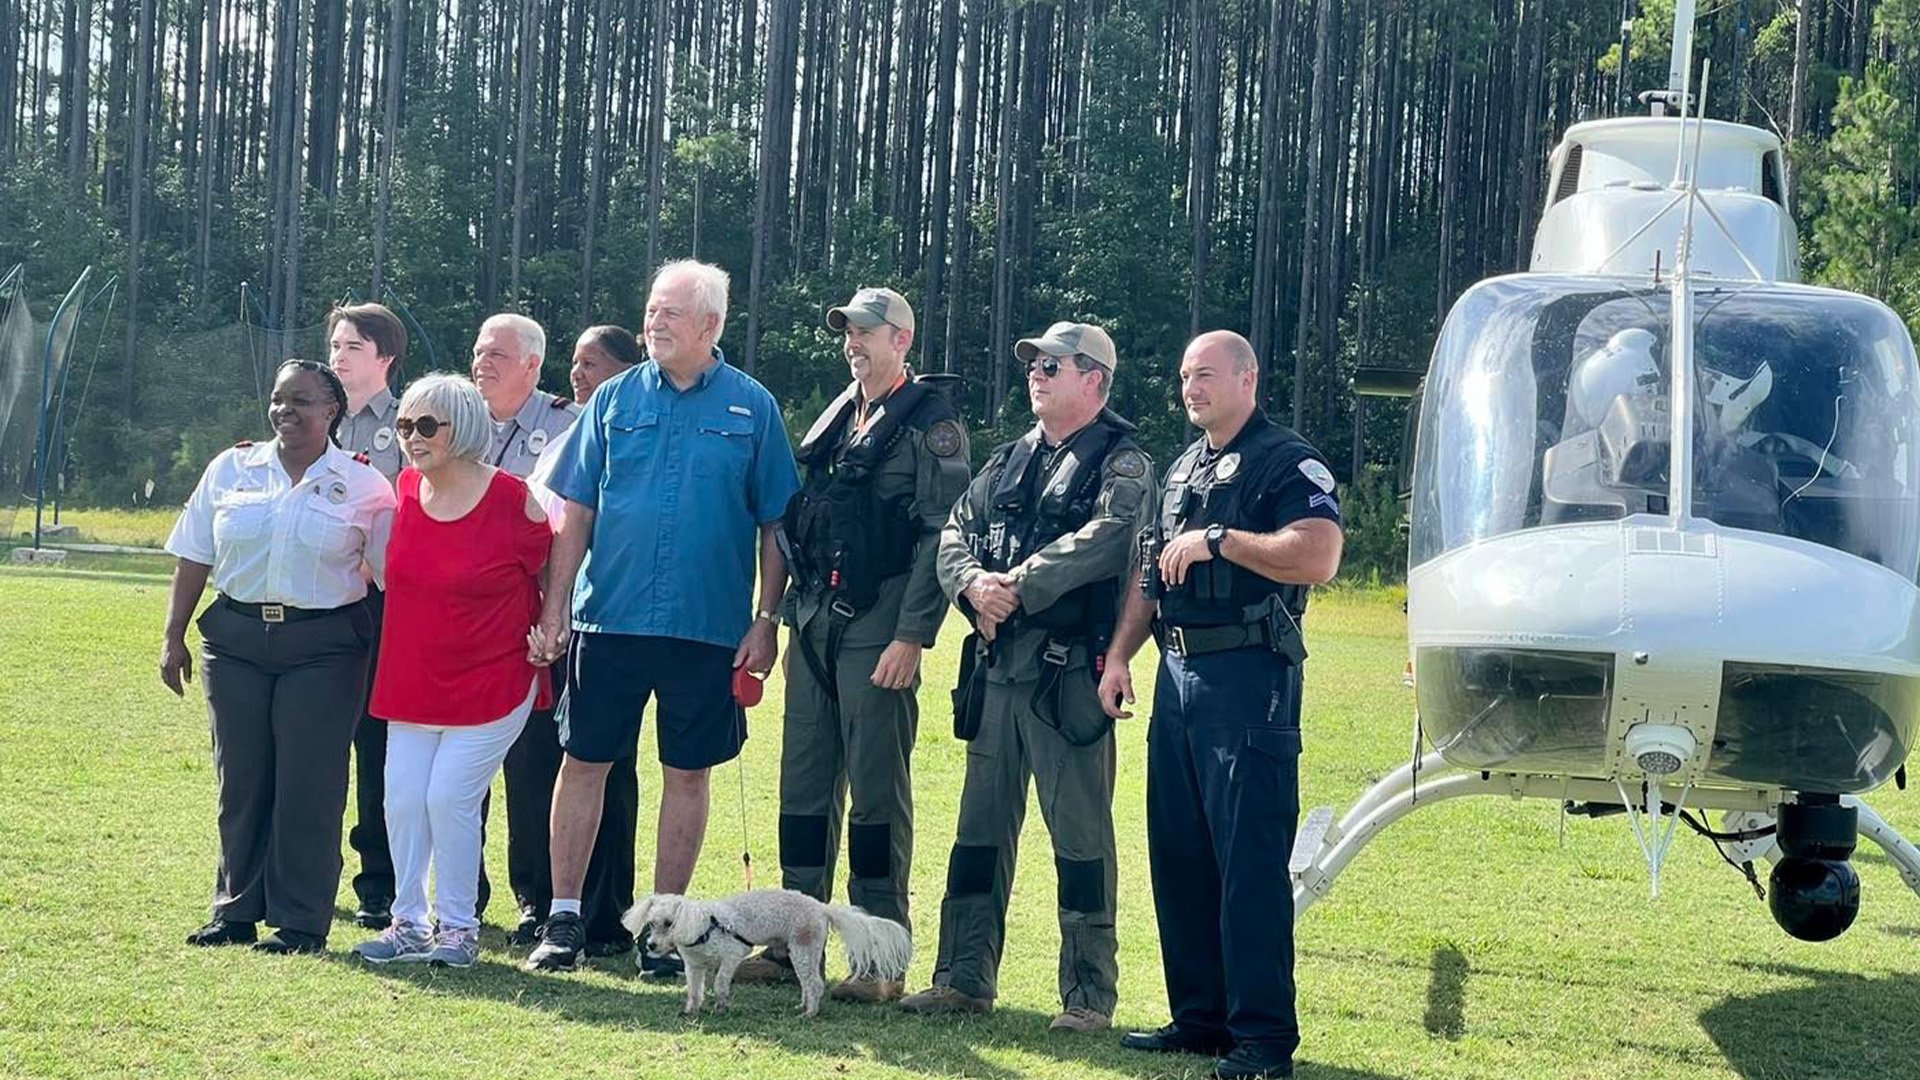 Sun City resident Raymond Teague (center, with dog Beauregard) reunited with the men and women who came to his rescue on the afternoon of June 18, 2022, in Beaufort County, South Carolina. Beaufort County Sheriff's Office photo.